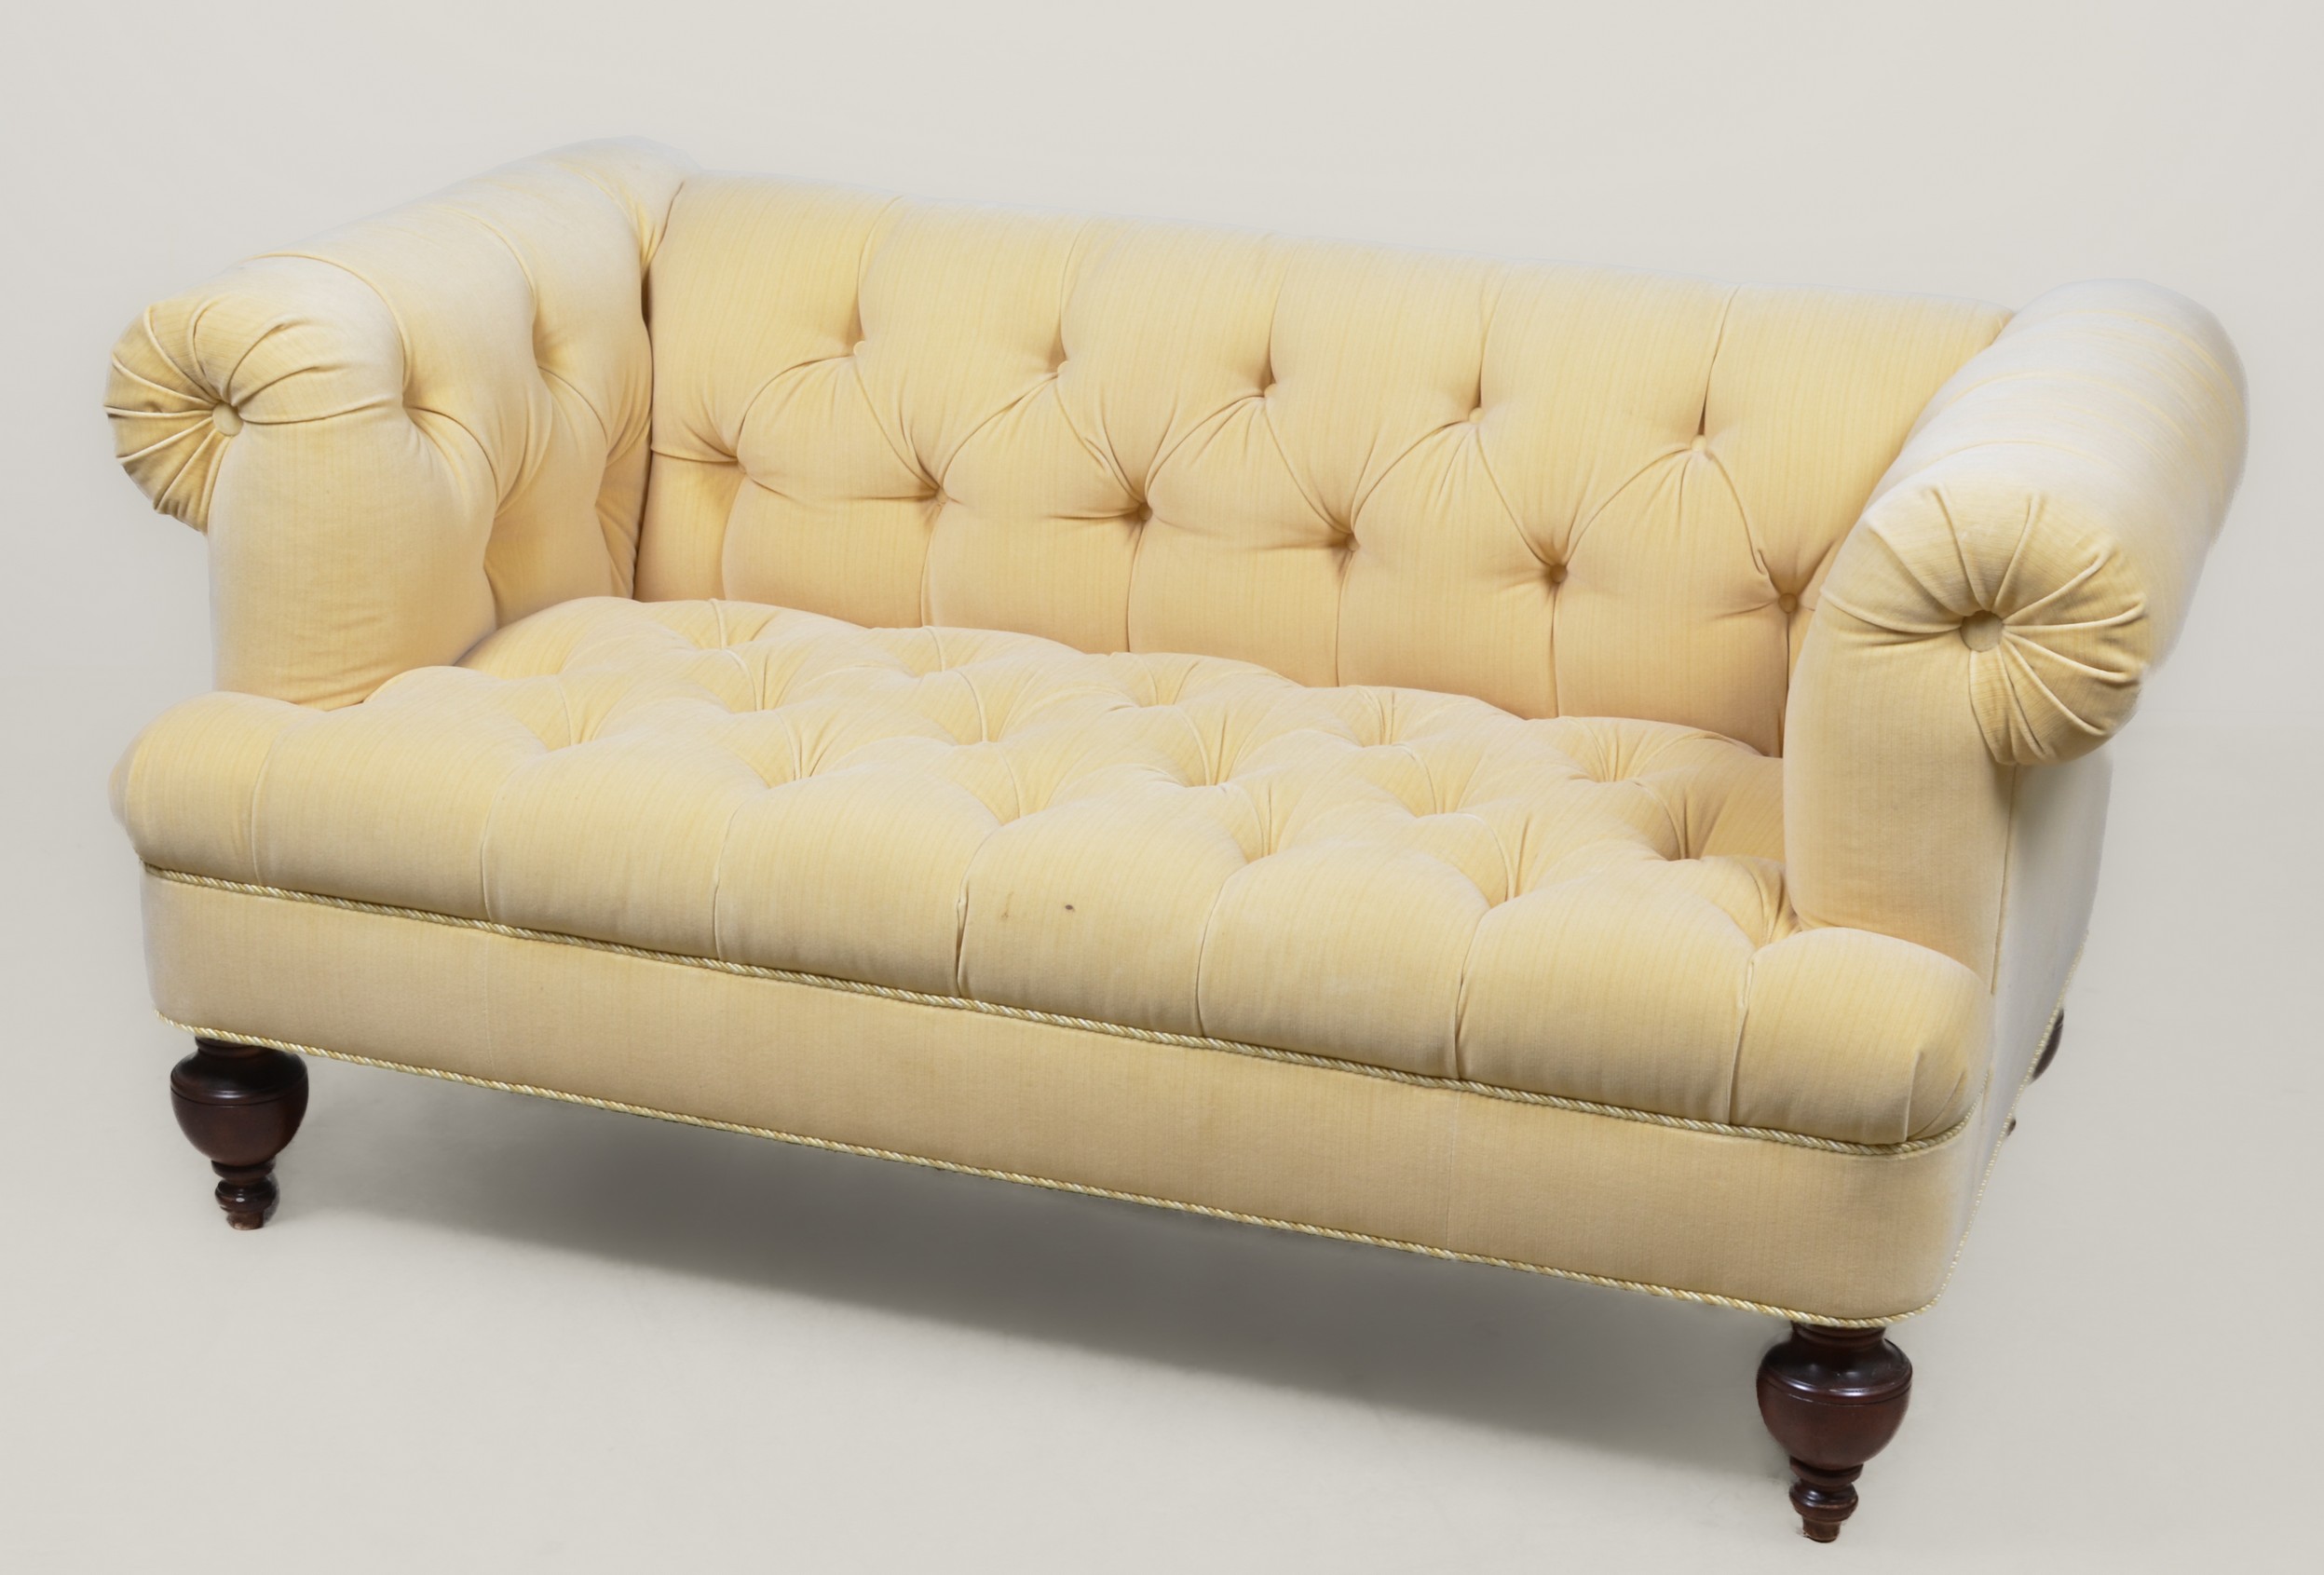 Upholstered tufted back and seat